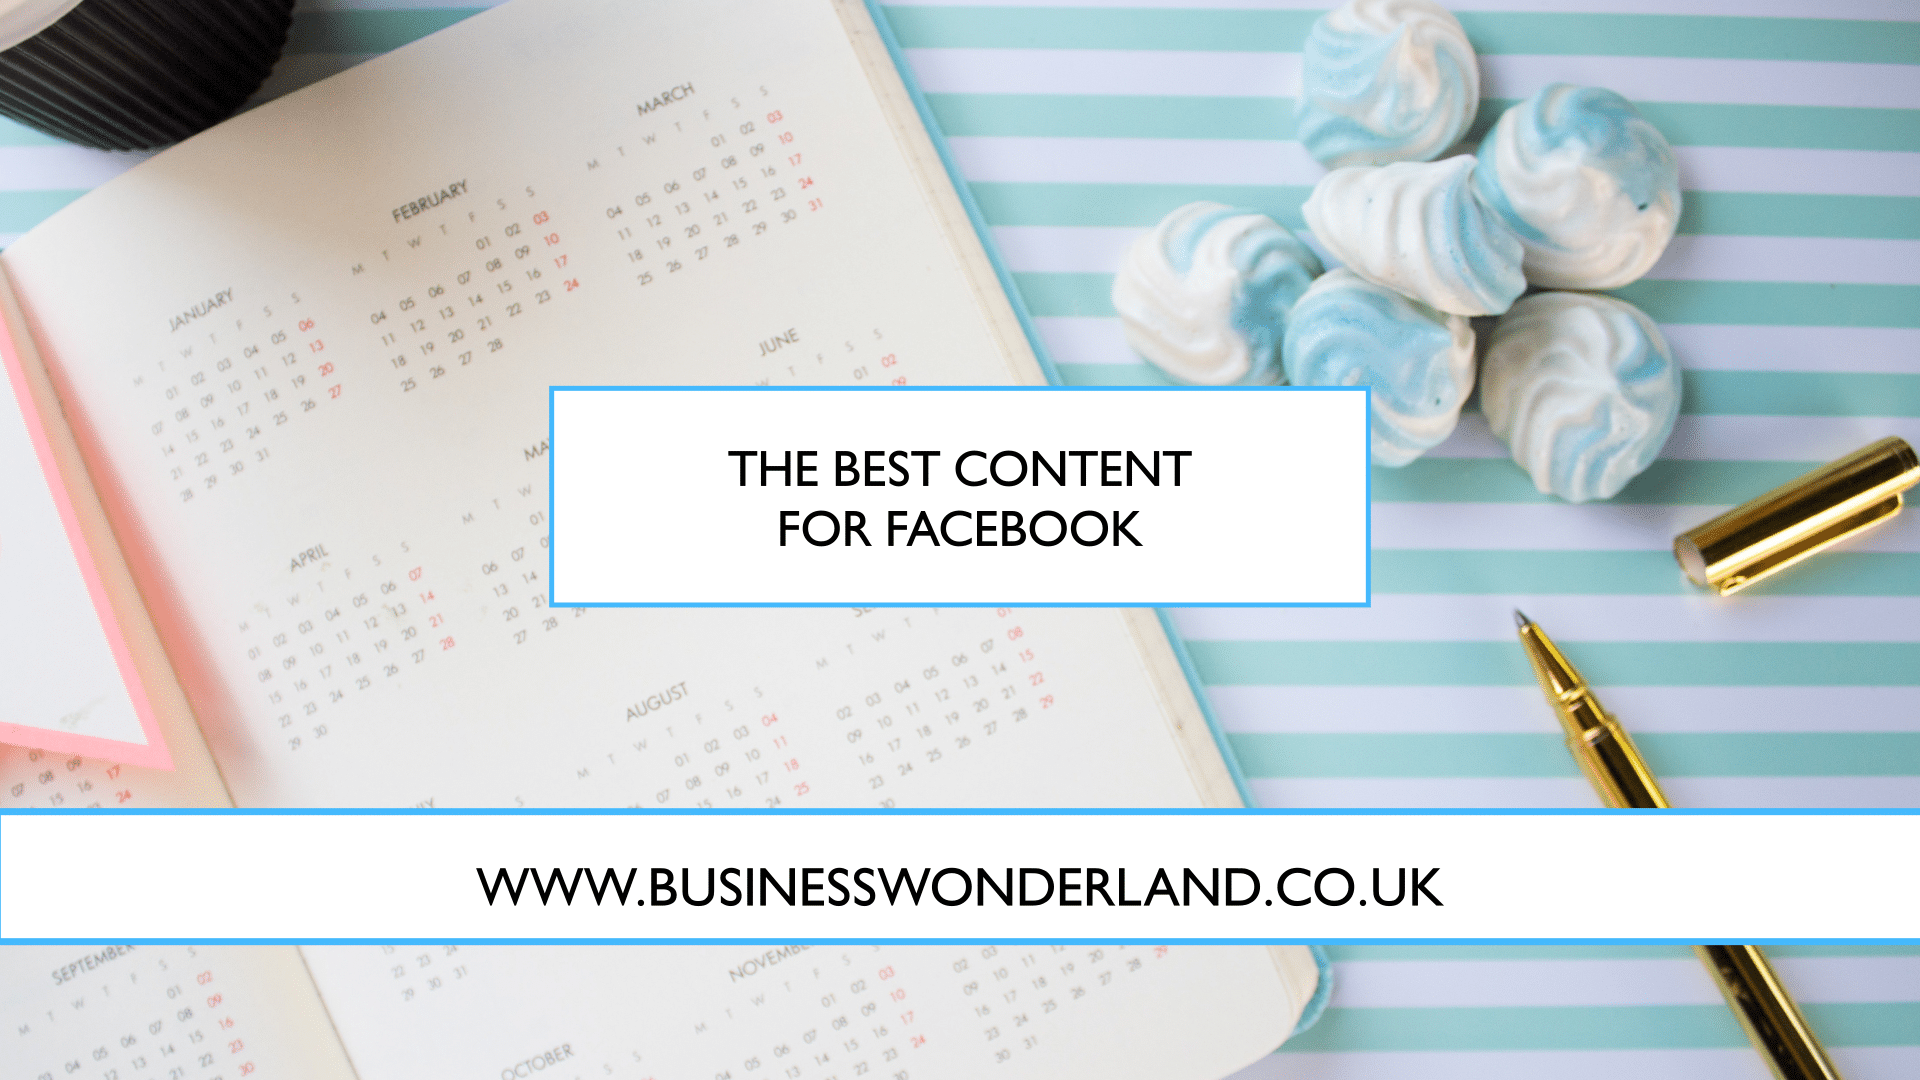 The best content to share on Facebook